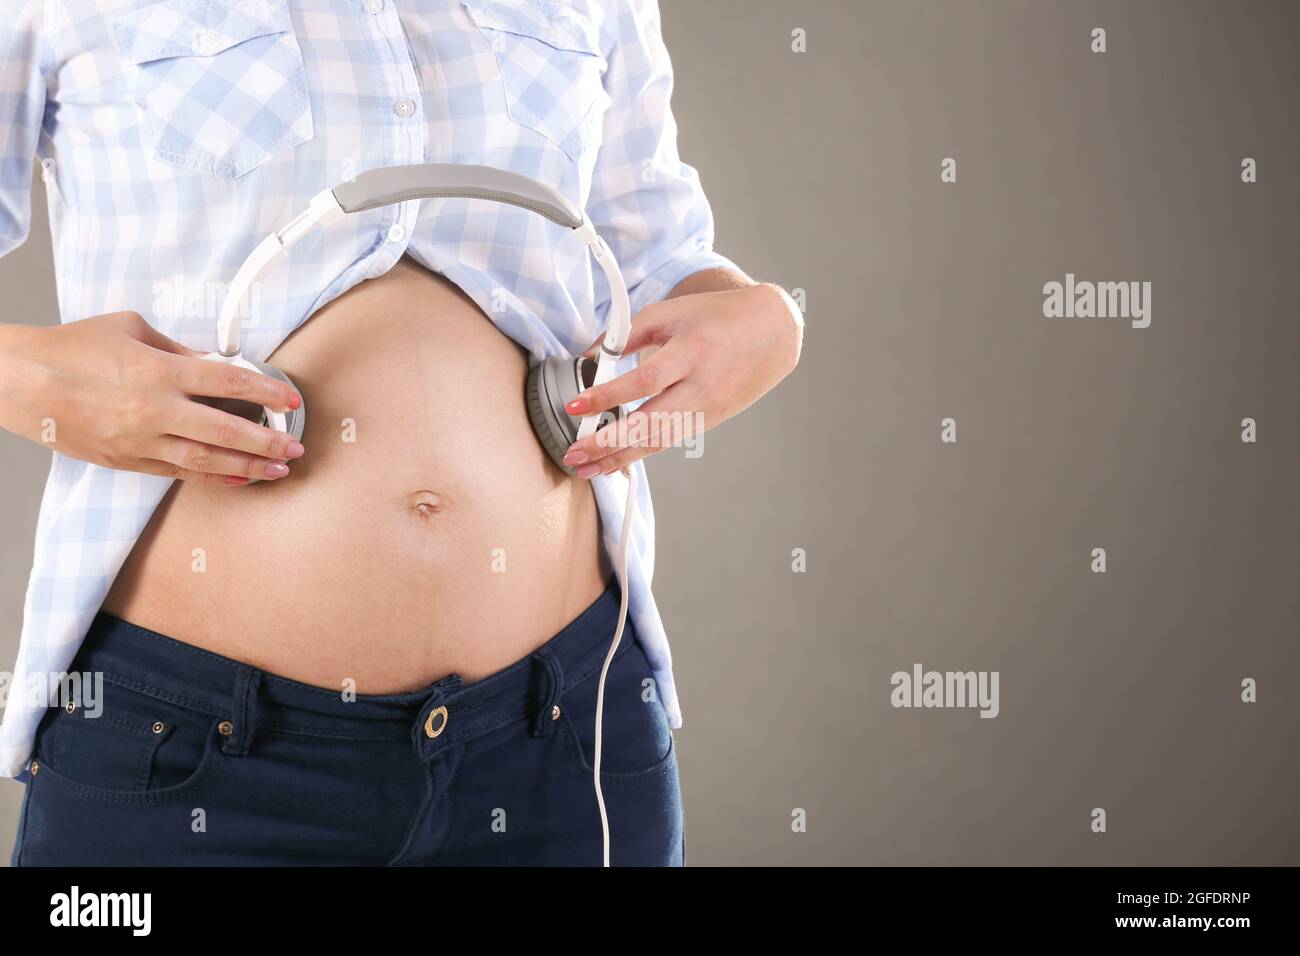 Pregnant woman holding headphones on belly Stock Photo